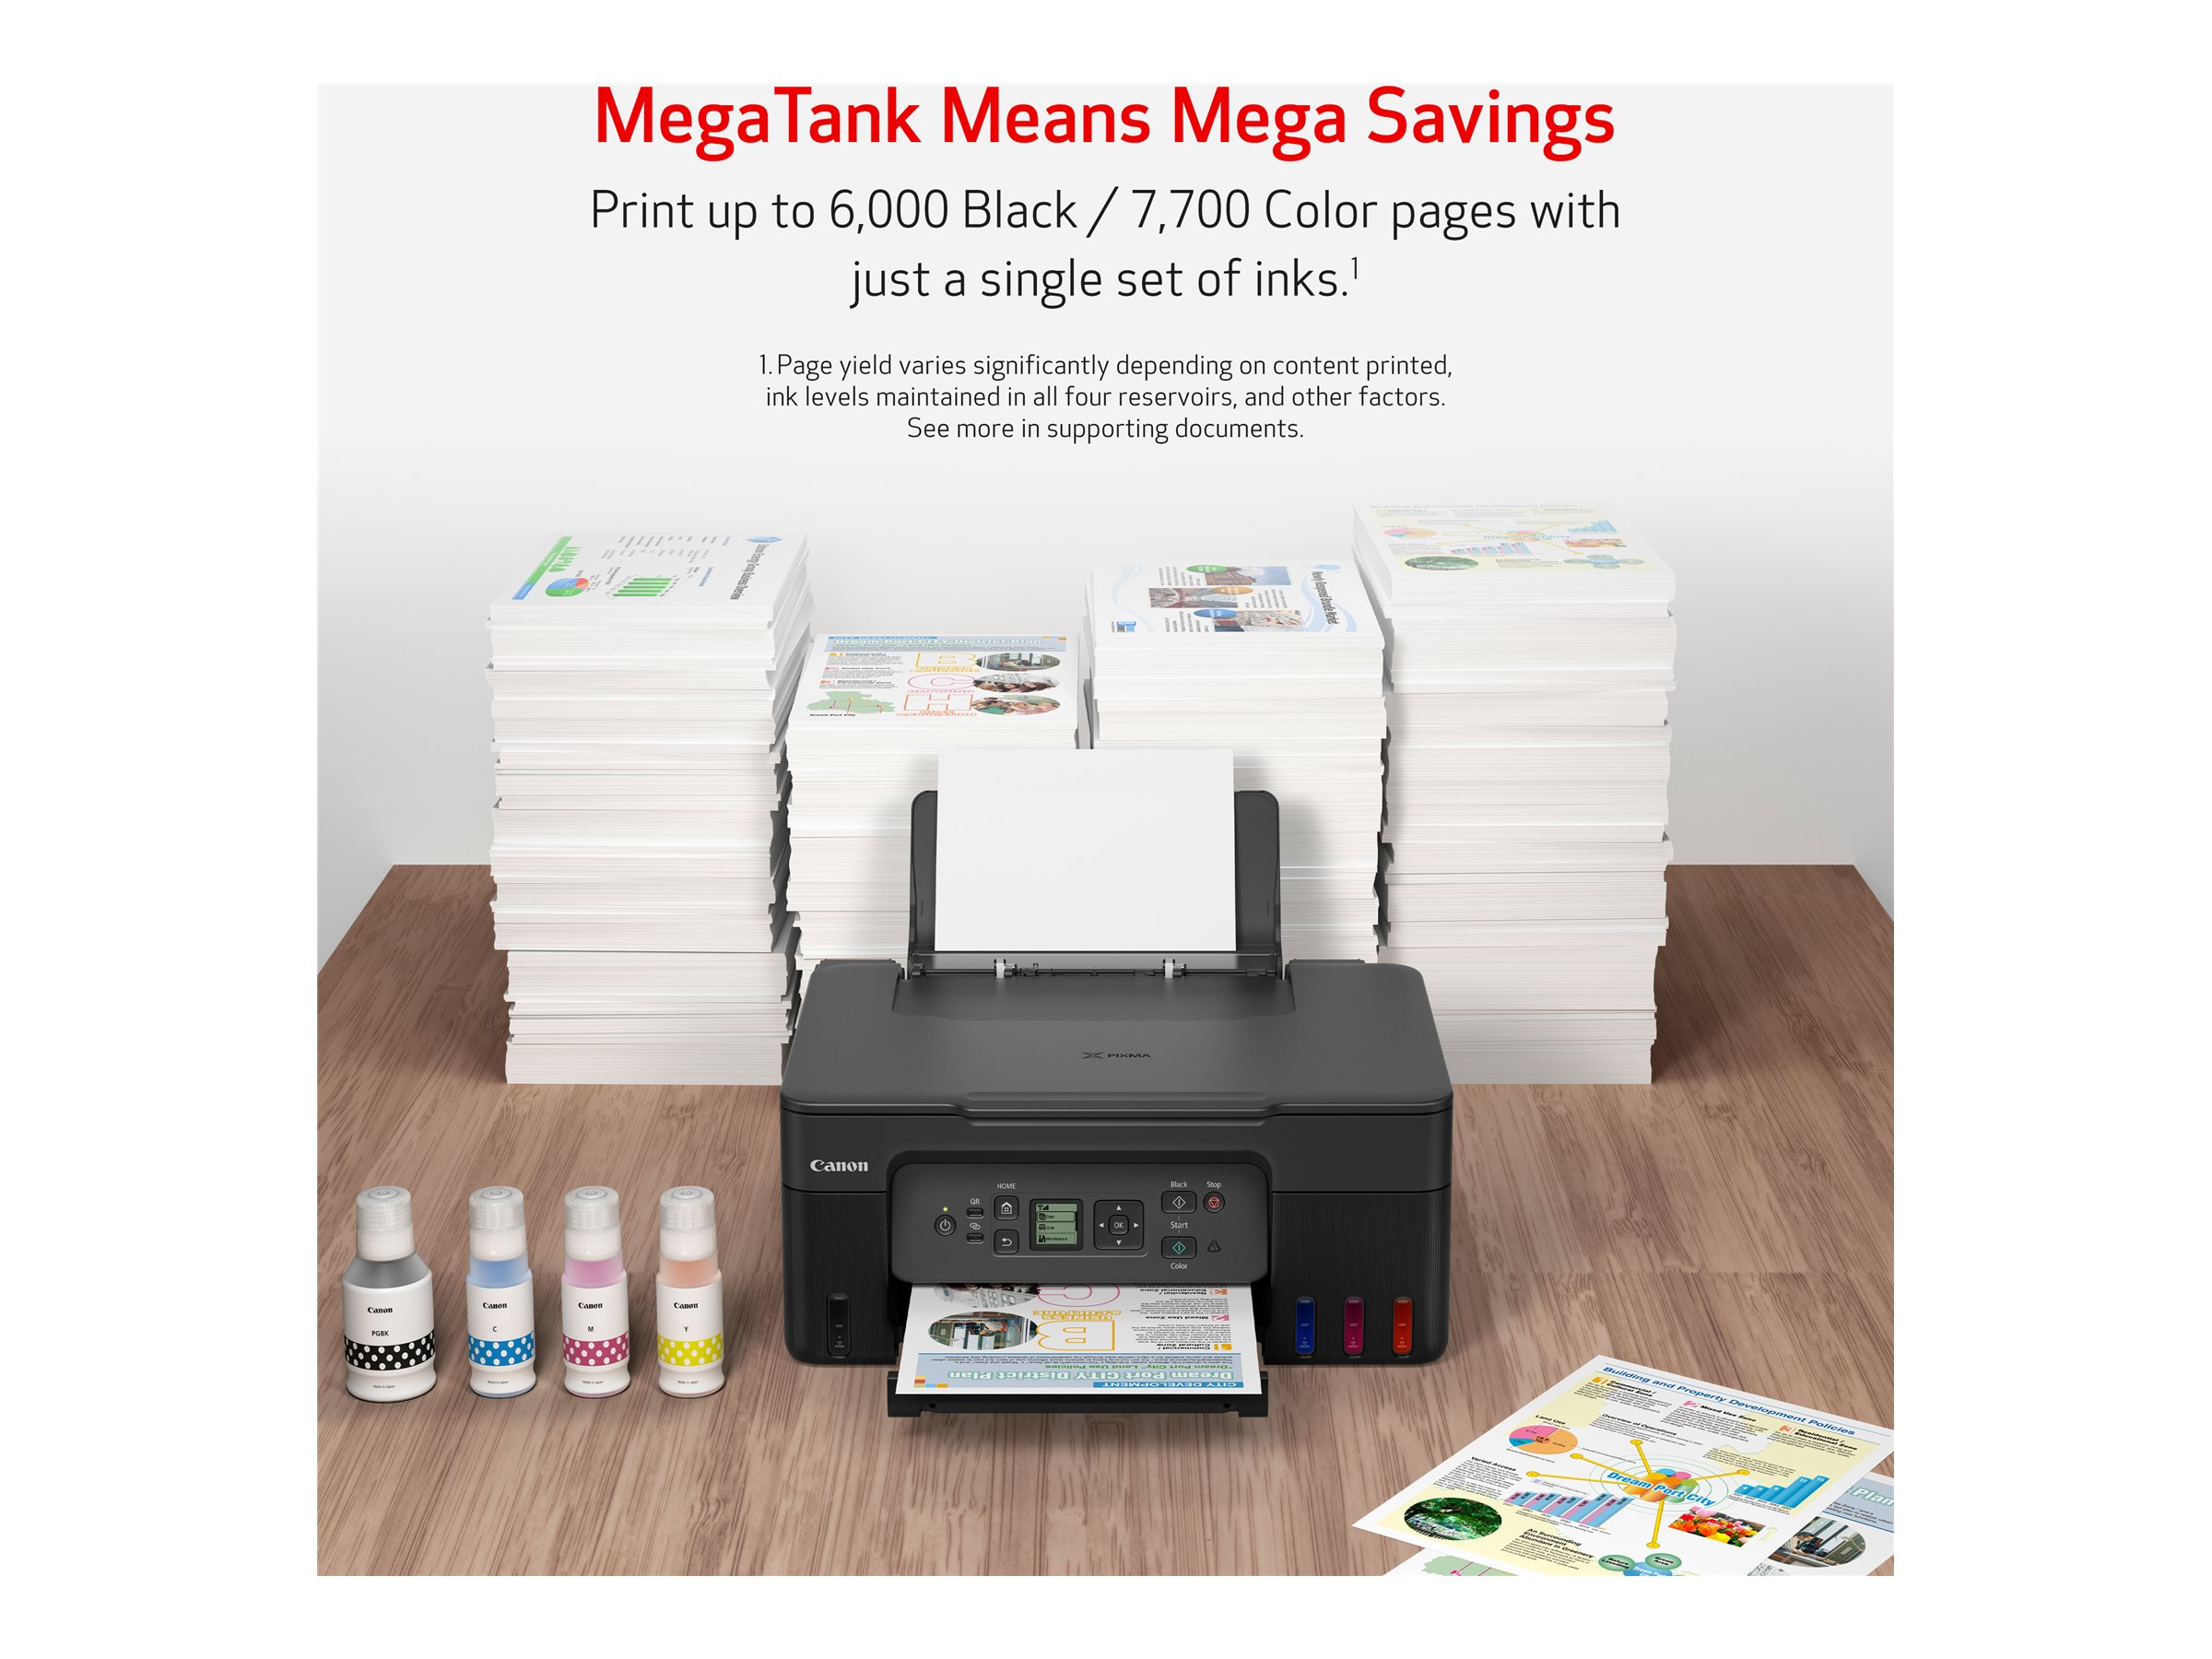 Canon PIXMA G3270 MegaTank All-in-One Wireless Color Printer with  Integrated Ink Tanks (Black) - 5805C002